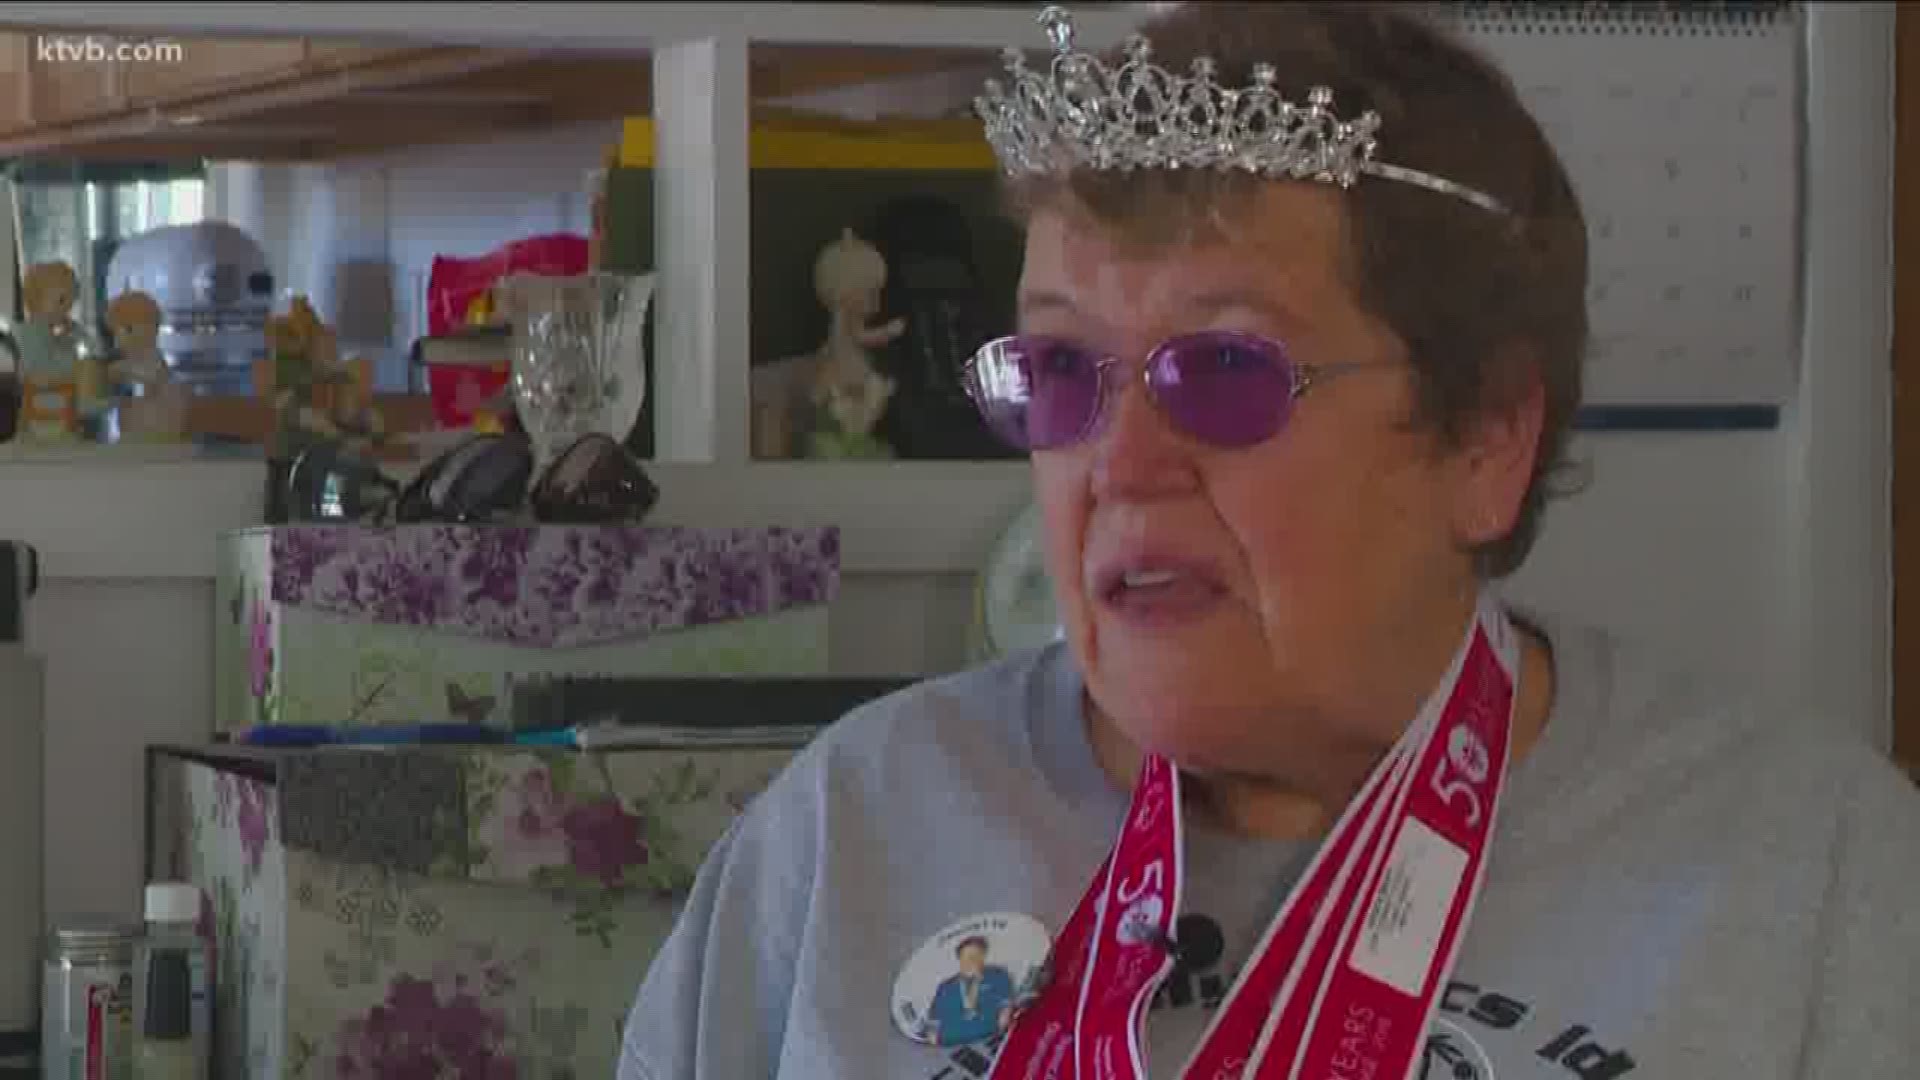 Special Olympics athlete Jeanette Boyle honored